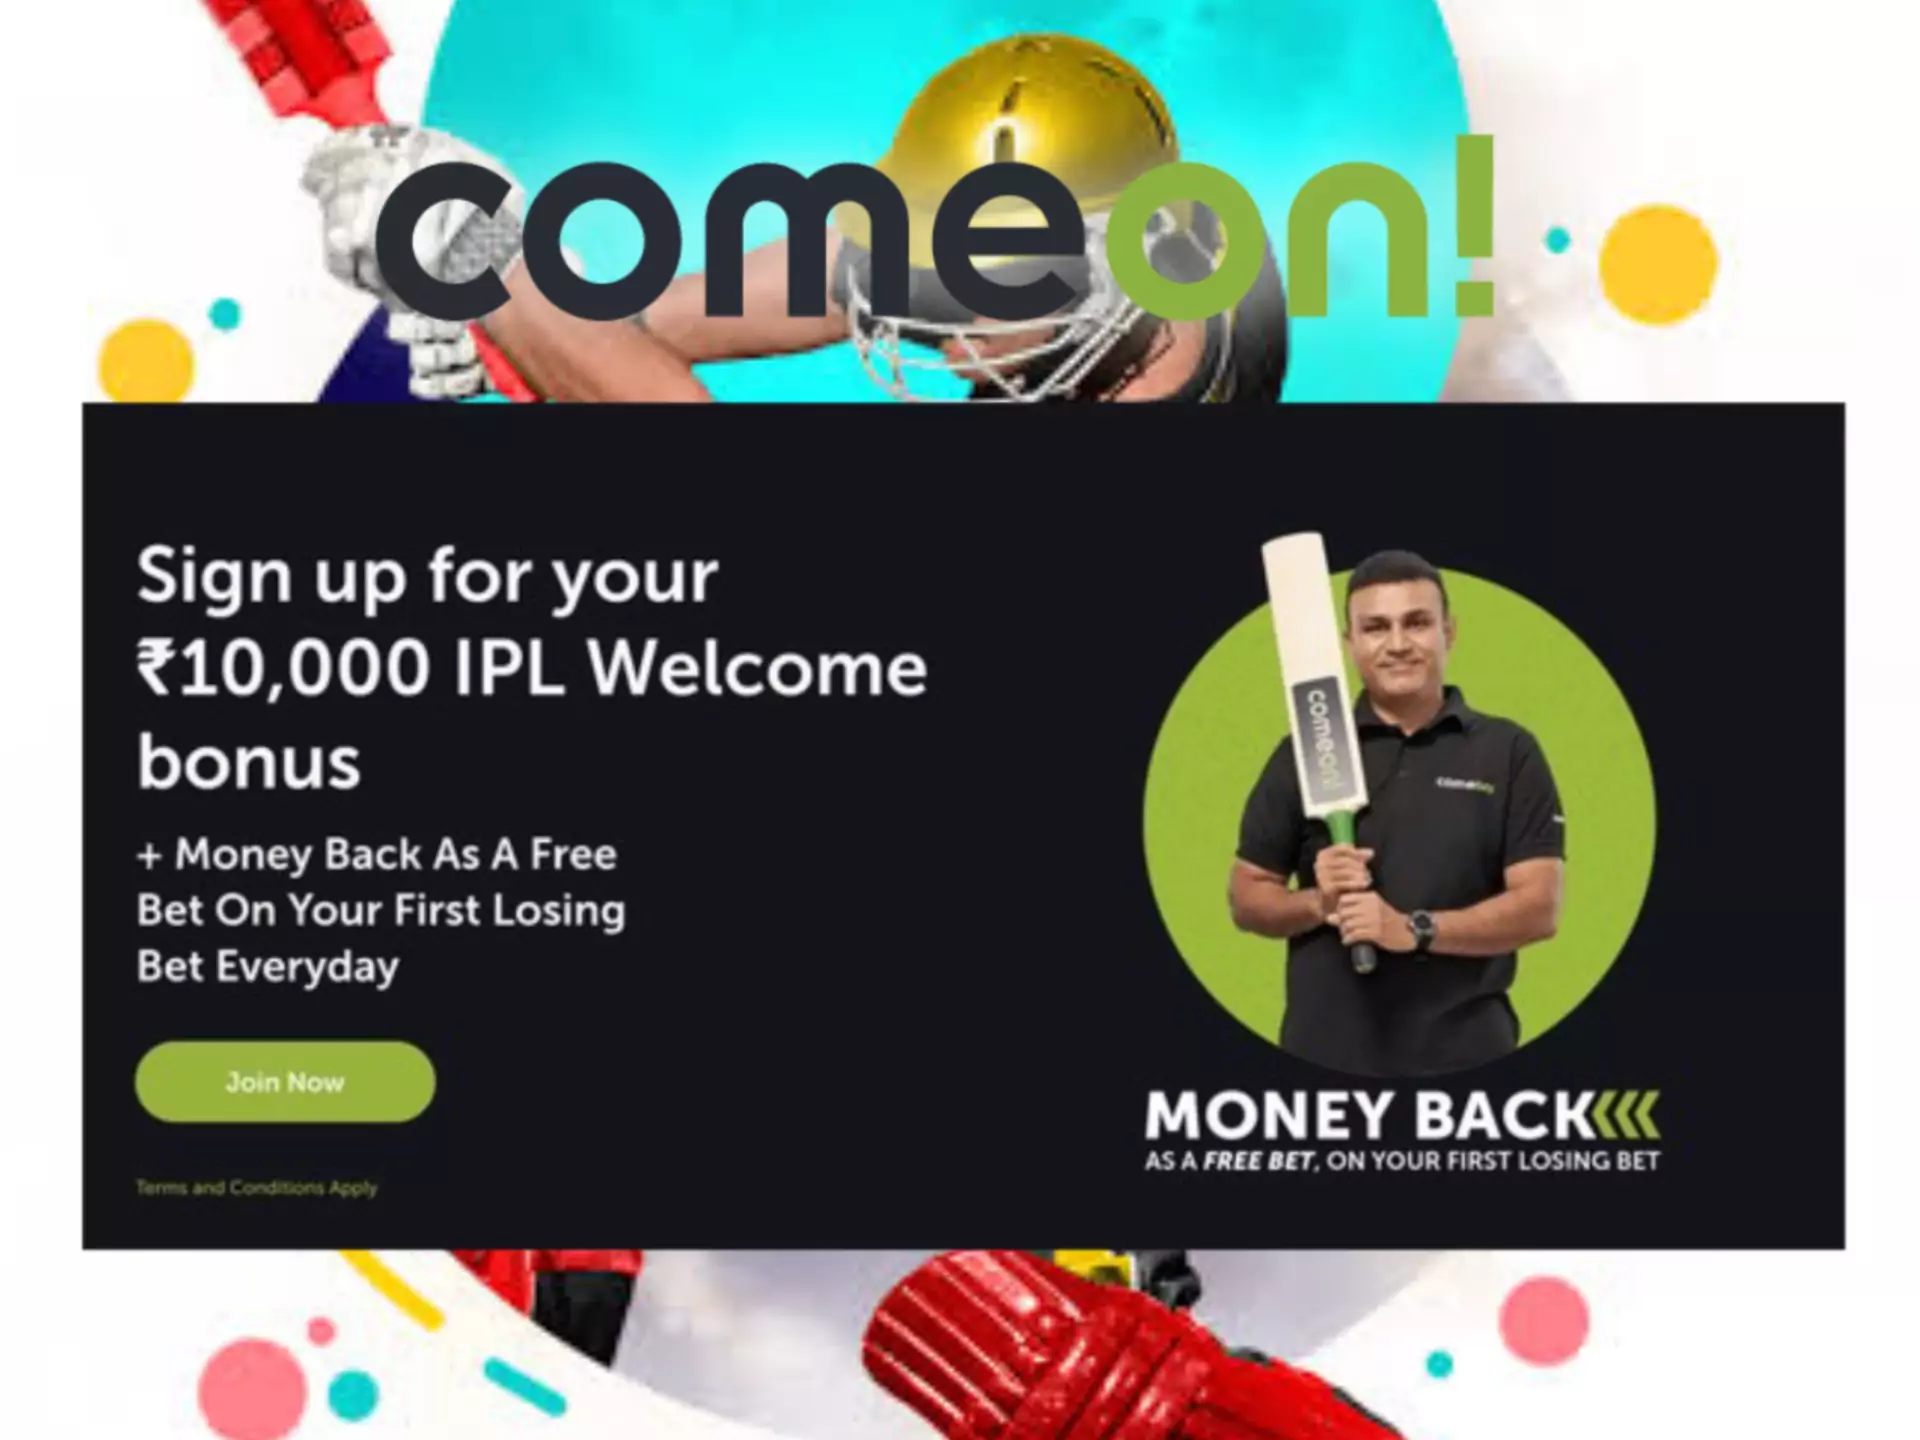 Comeon offers one of the biggest welcome bonuses on IPL betting, so register here.